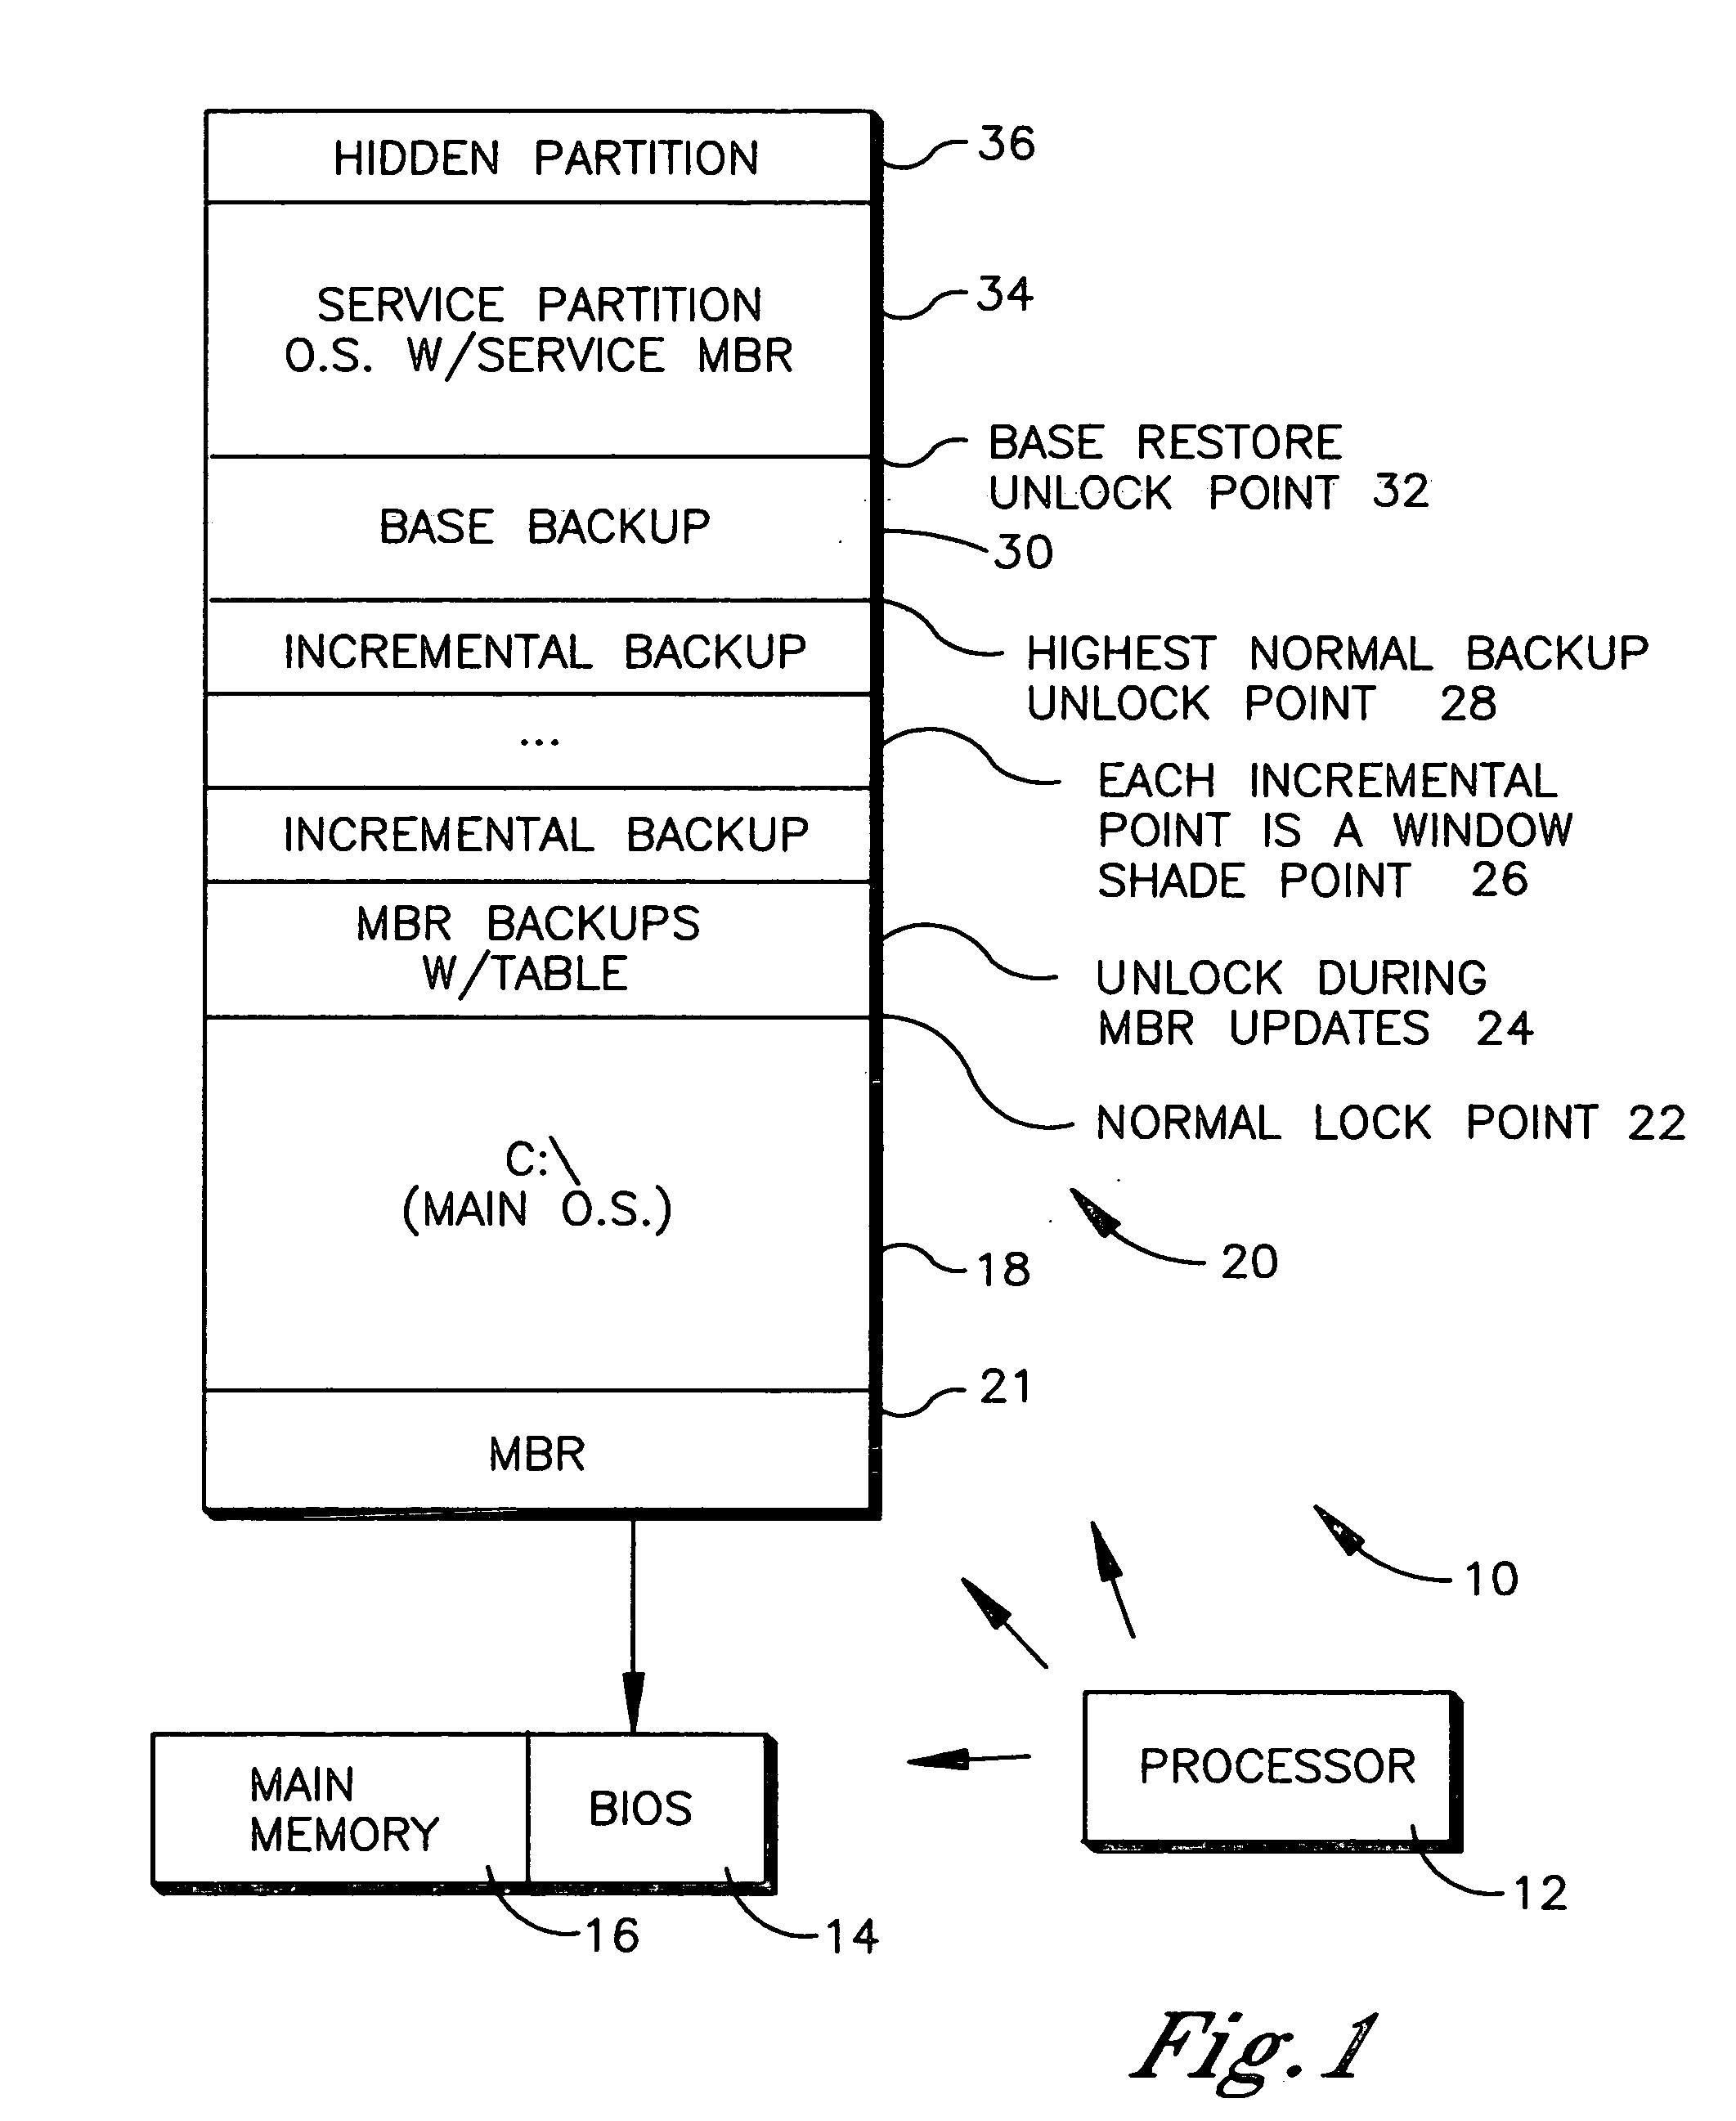 System and method for booting alternate MBR in event of virus attack